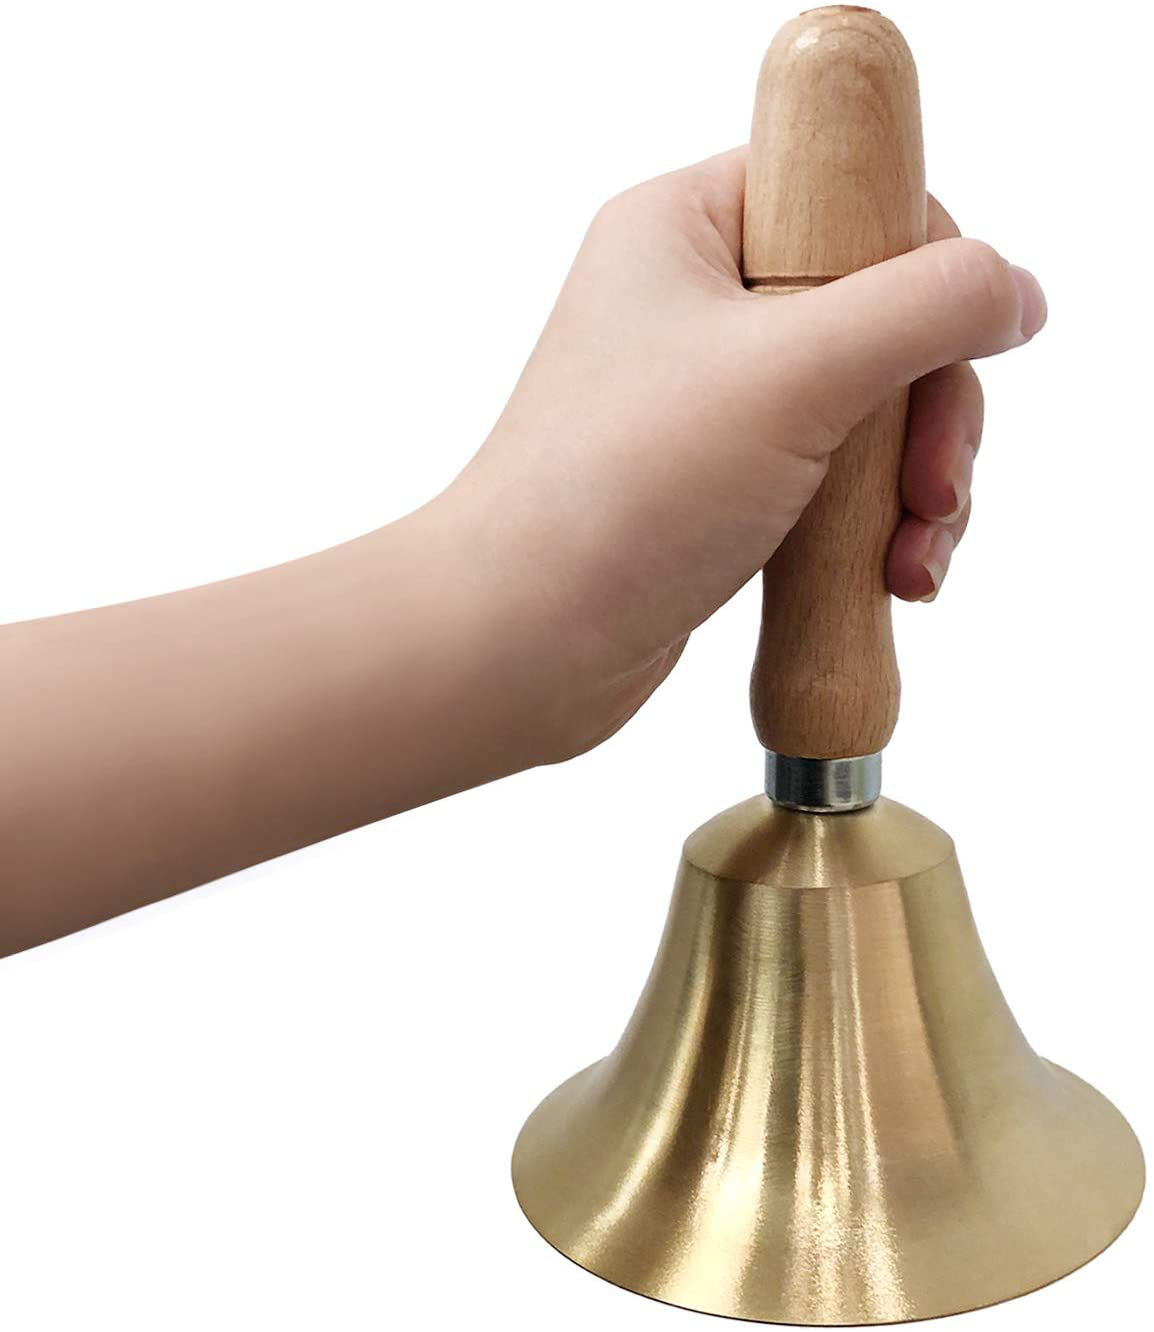  Hand Bell - Hand Call Bell with Brass Solid Wood Handle,Very  Loud Handbell，3.15 Inch Large Hand Bell ，Hand Bells for Kids and Adults,  Used for Weddings, School Classroom，Service and Game 